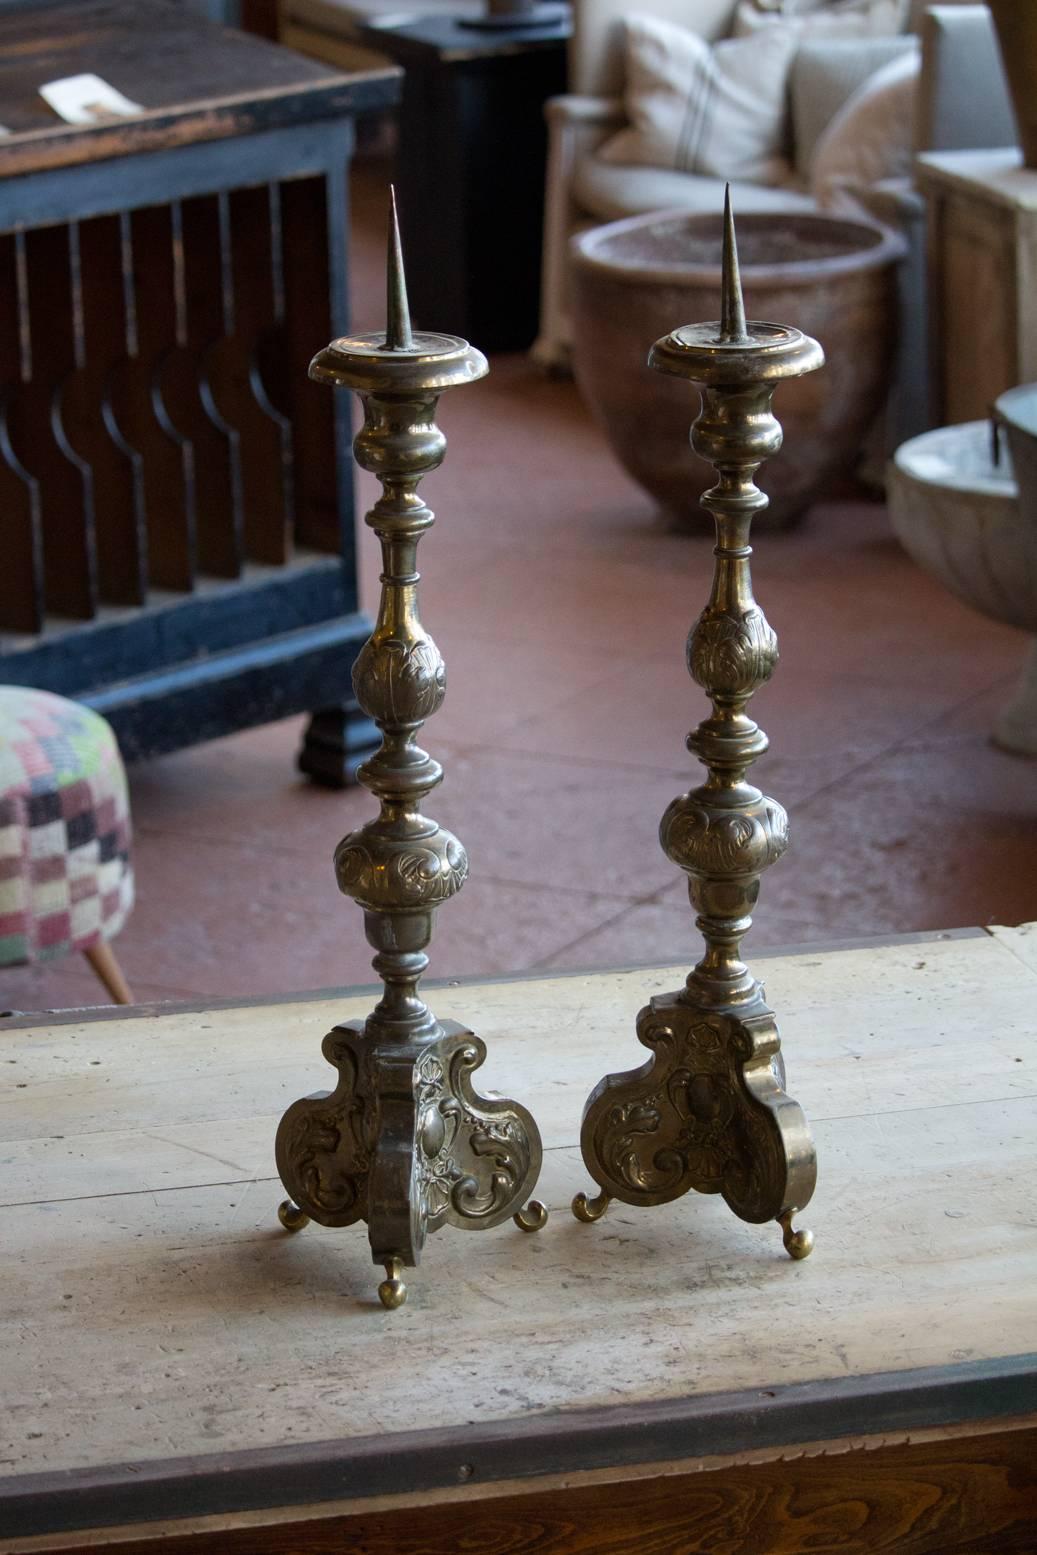 Pair of antique brass pricket candlesticks, with embossed foliate and beautiful patina. Baroque embellishments.